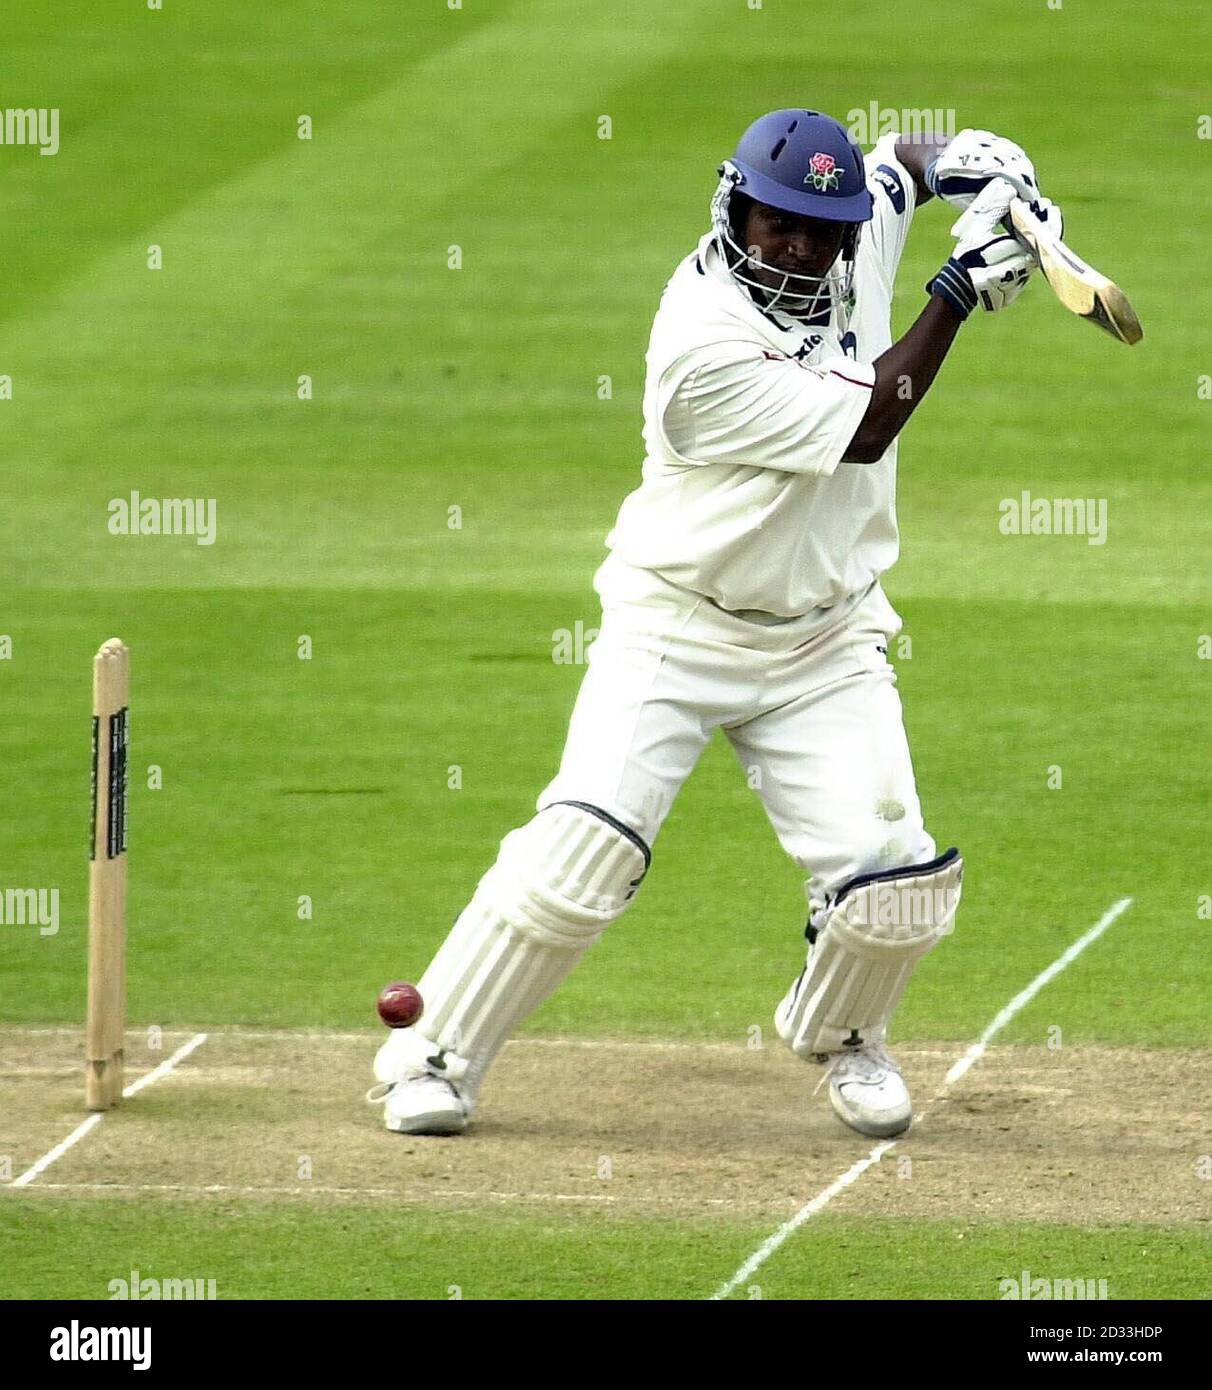 Lancashire's Carl Hooper scores a single off the bowling of Middlesex's Paul Weekes during the Frizzell County Championship match at Lords, St John's Wood, London. Stock Photo